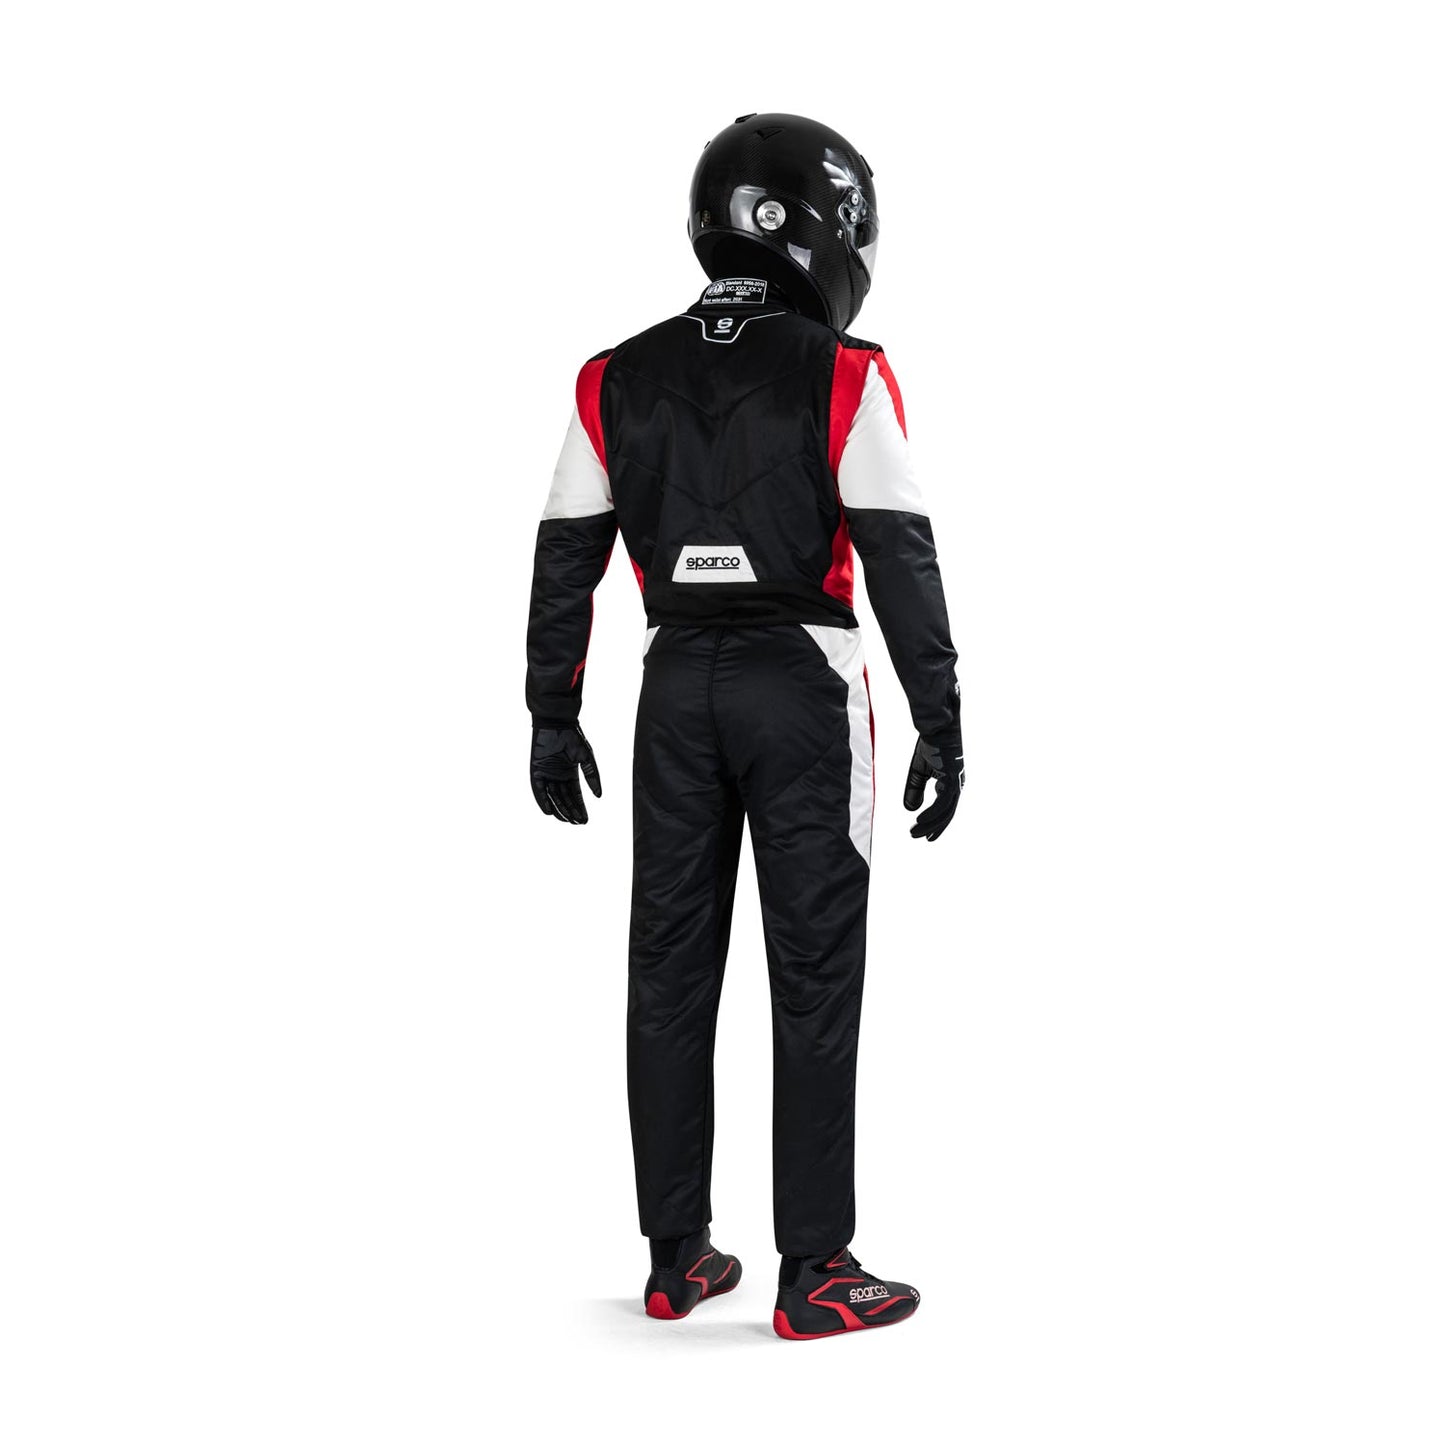 Sparco  Competition MY22 Racing Suit  (FIA)